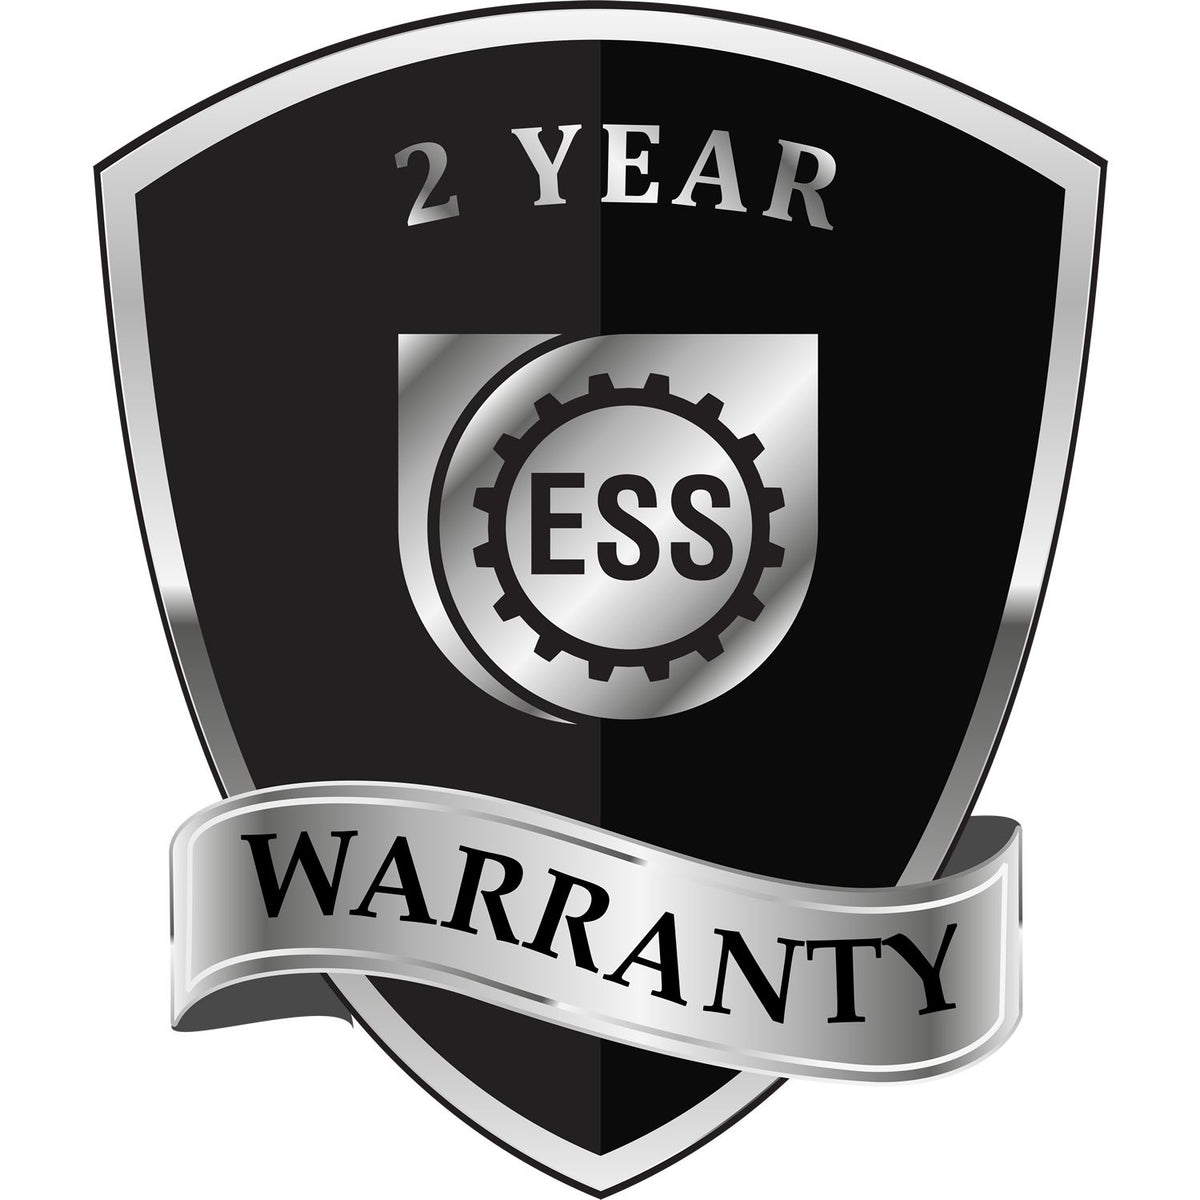 A black and silver badge or emblem showing warranty information for the Gift Hawaii Land Surveyor Seal